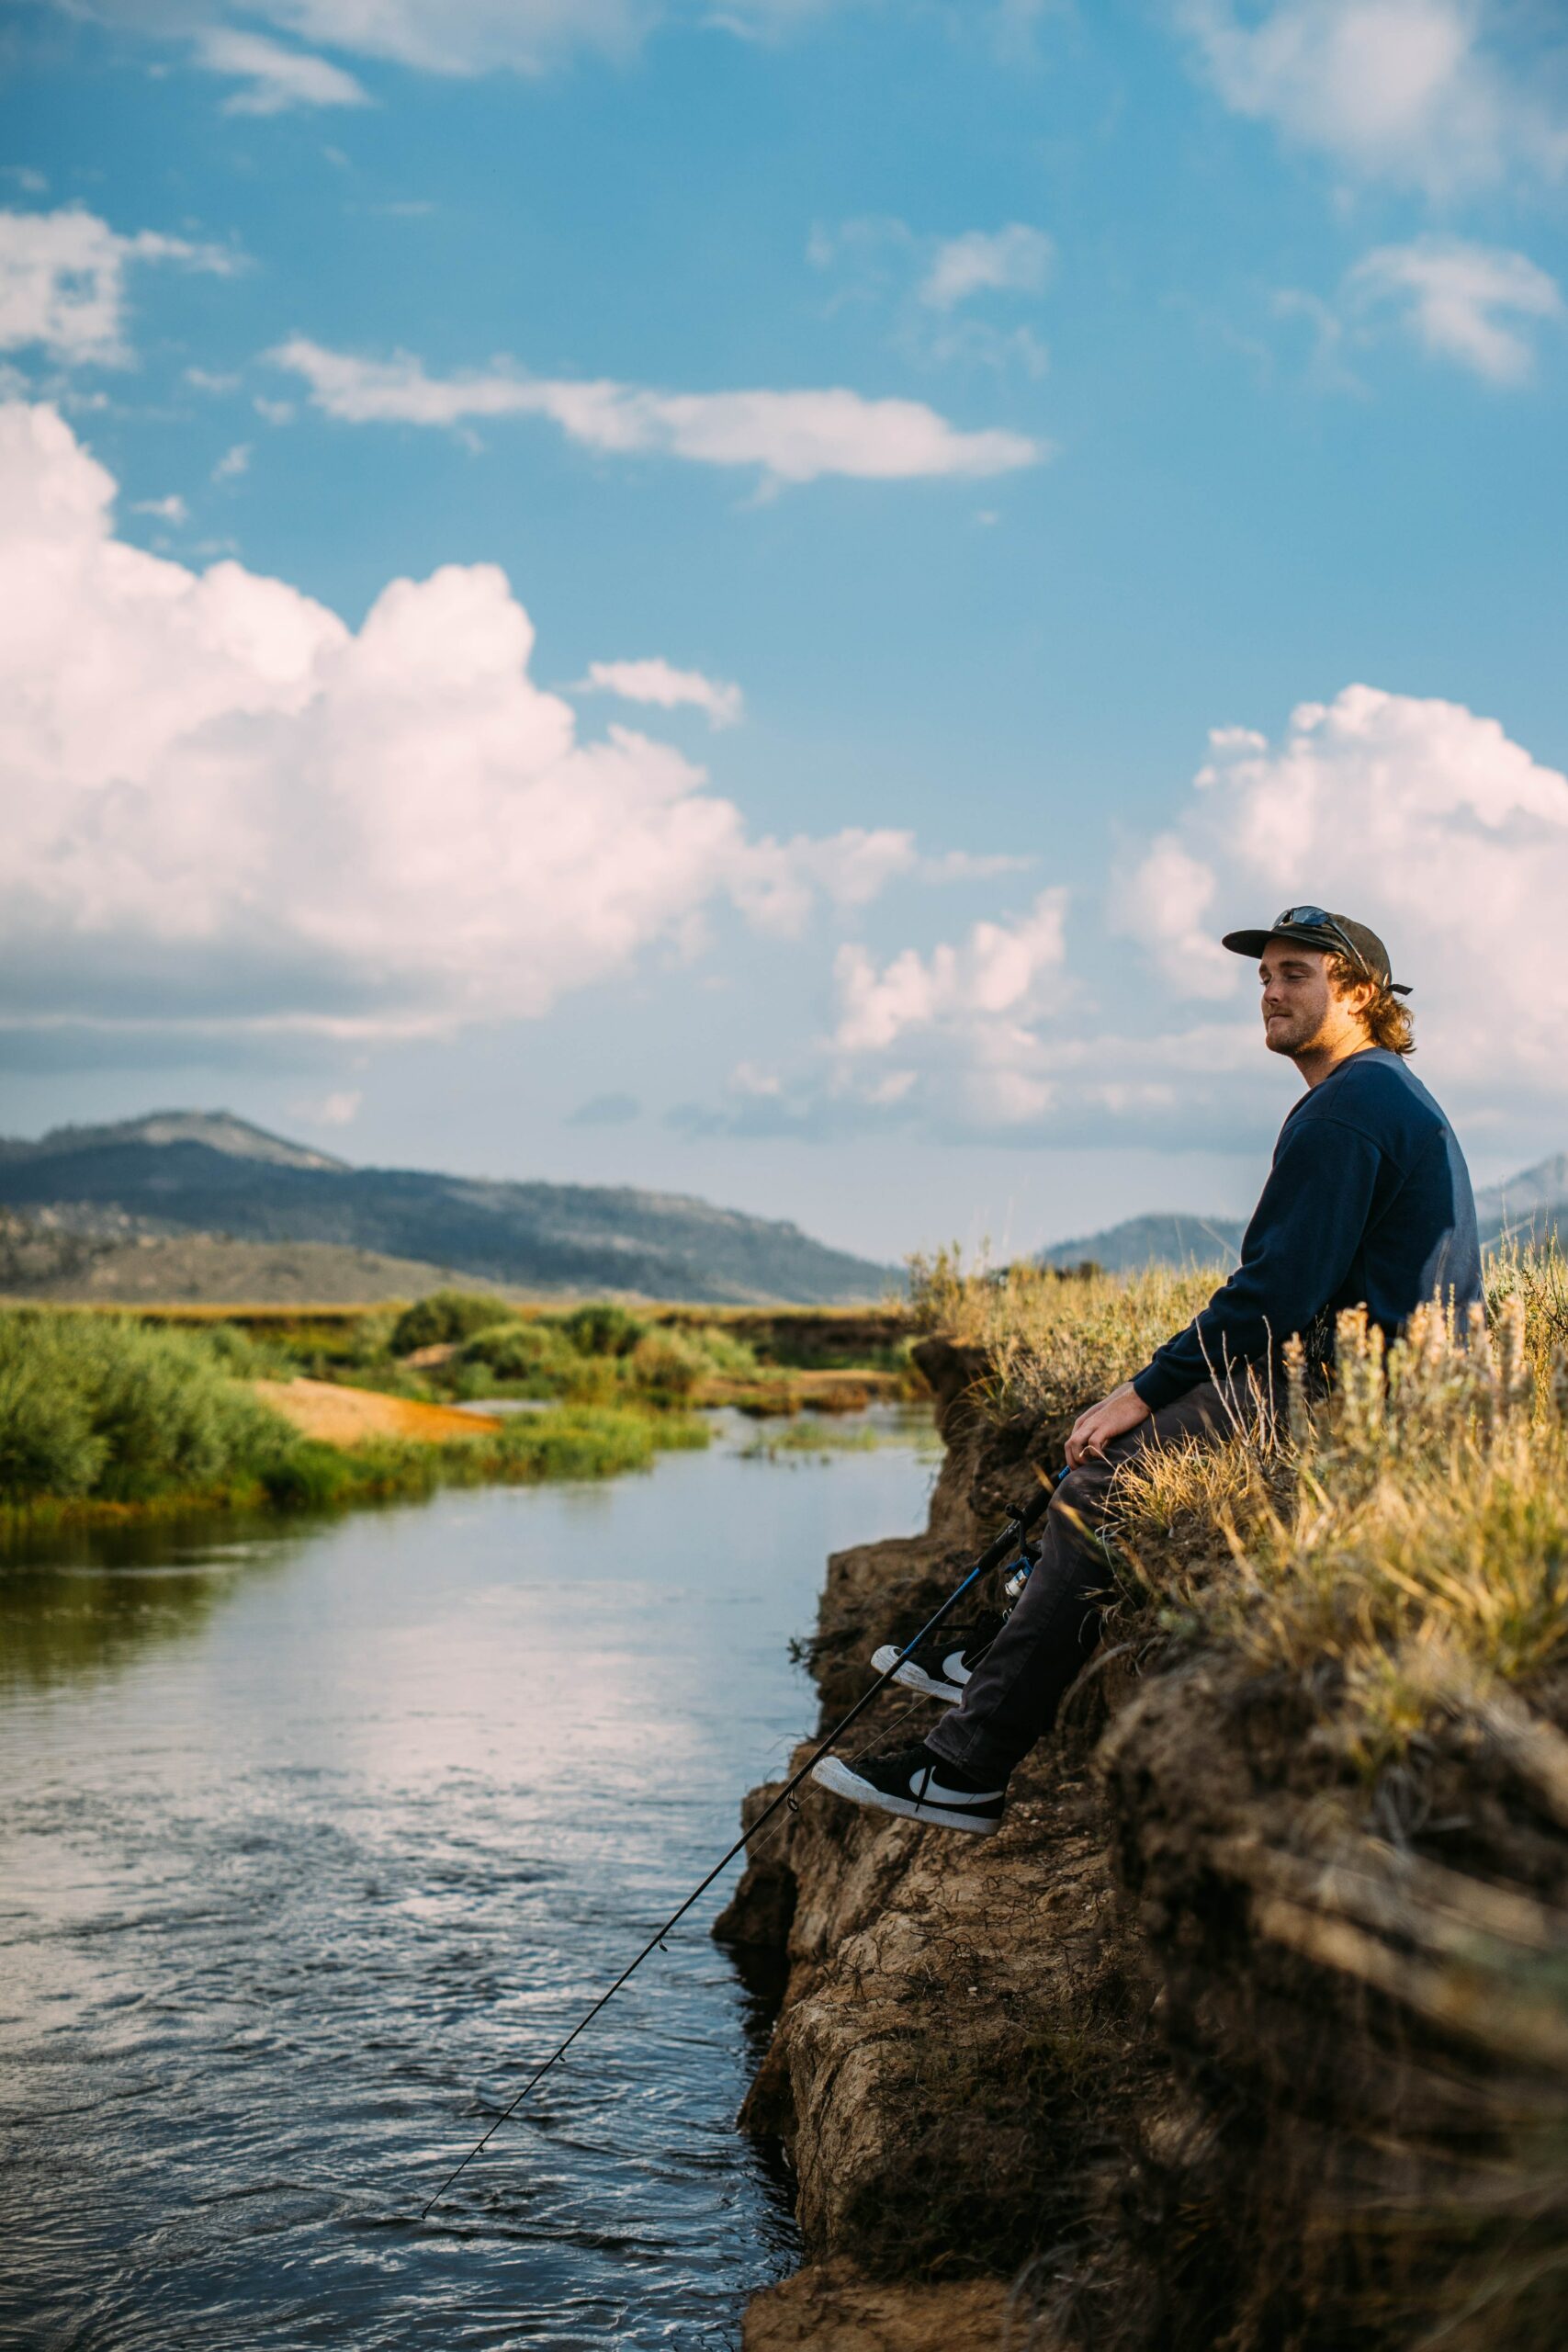 A man sits by the river's edge with a fishing rod, savoring the beauty of nature.